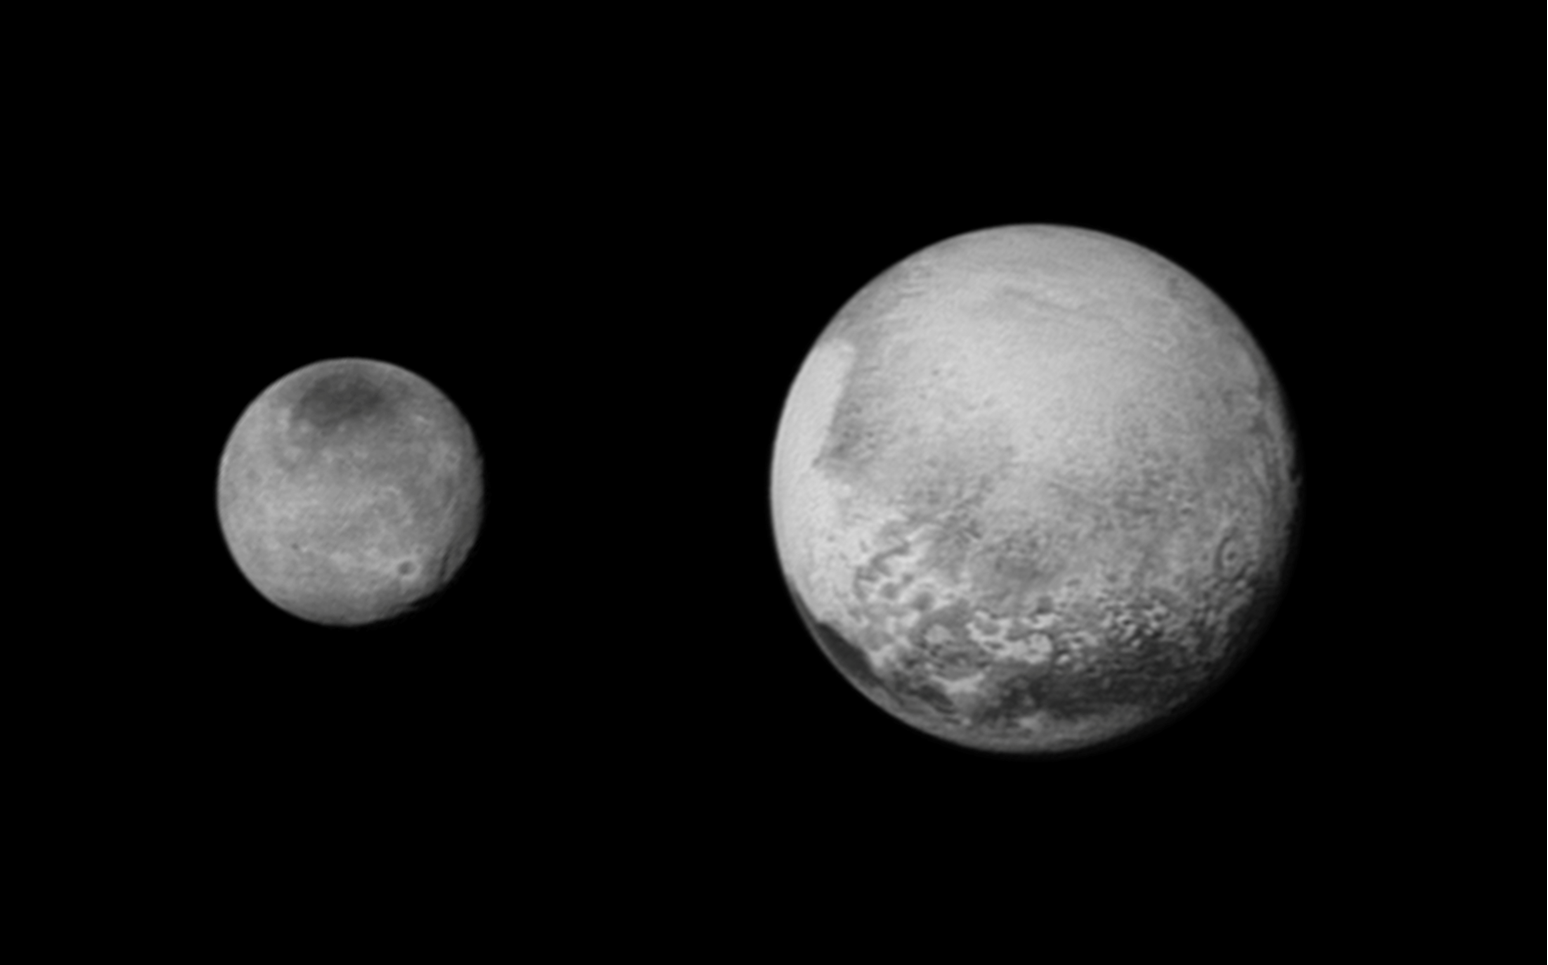 July 12 views of Charon and Pluto from New Horizons